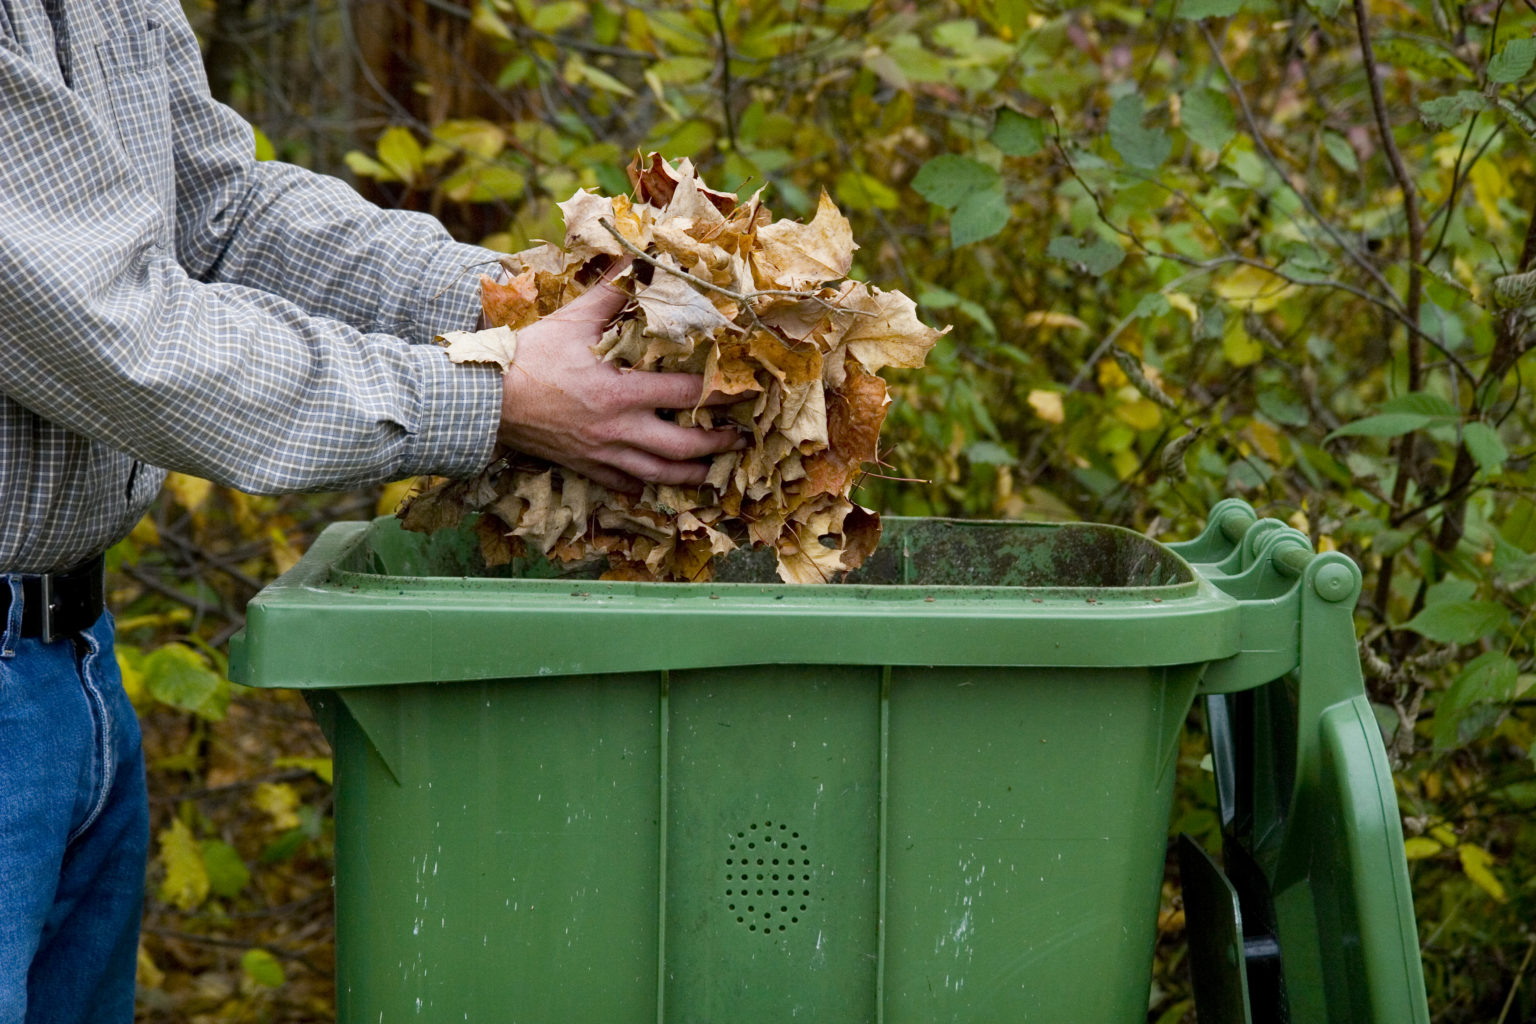 Man tossing leaves into a green compost receptacle outside